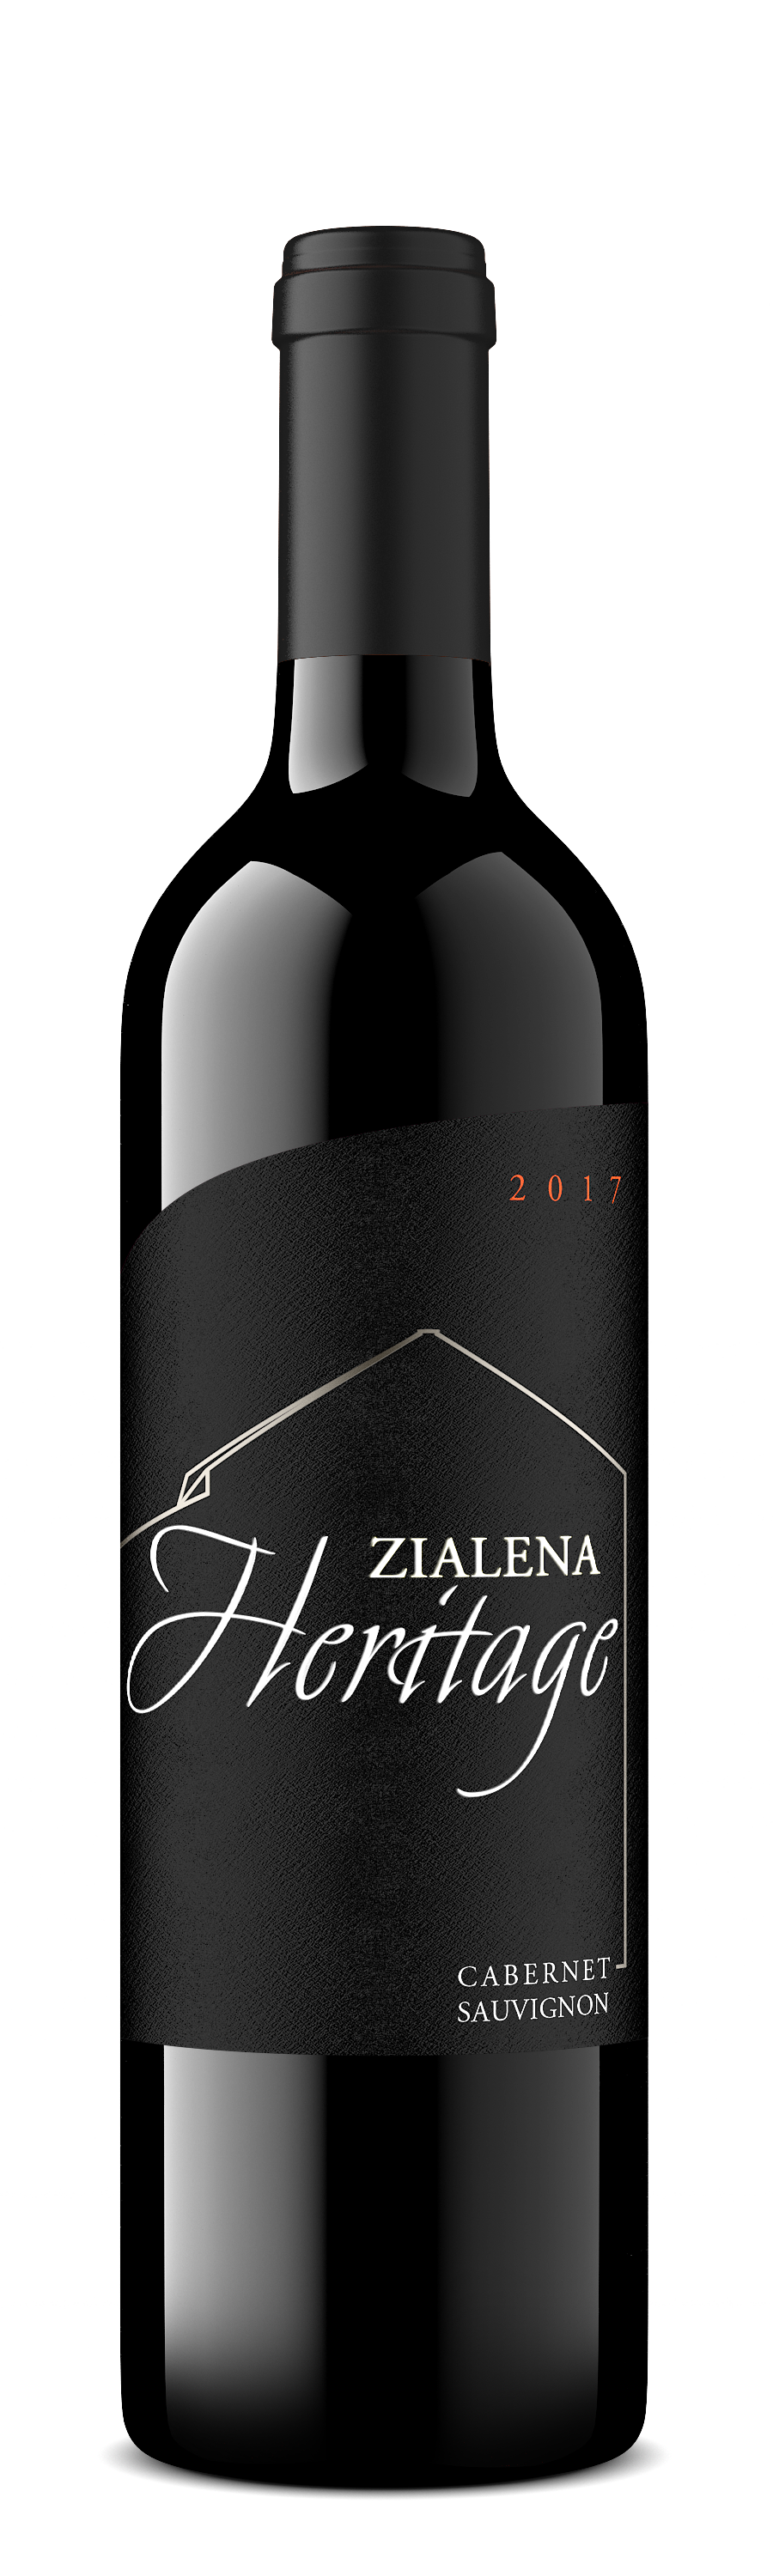 Product Image for 2017 Cabernet Sauvignon Heritage